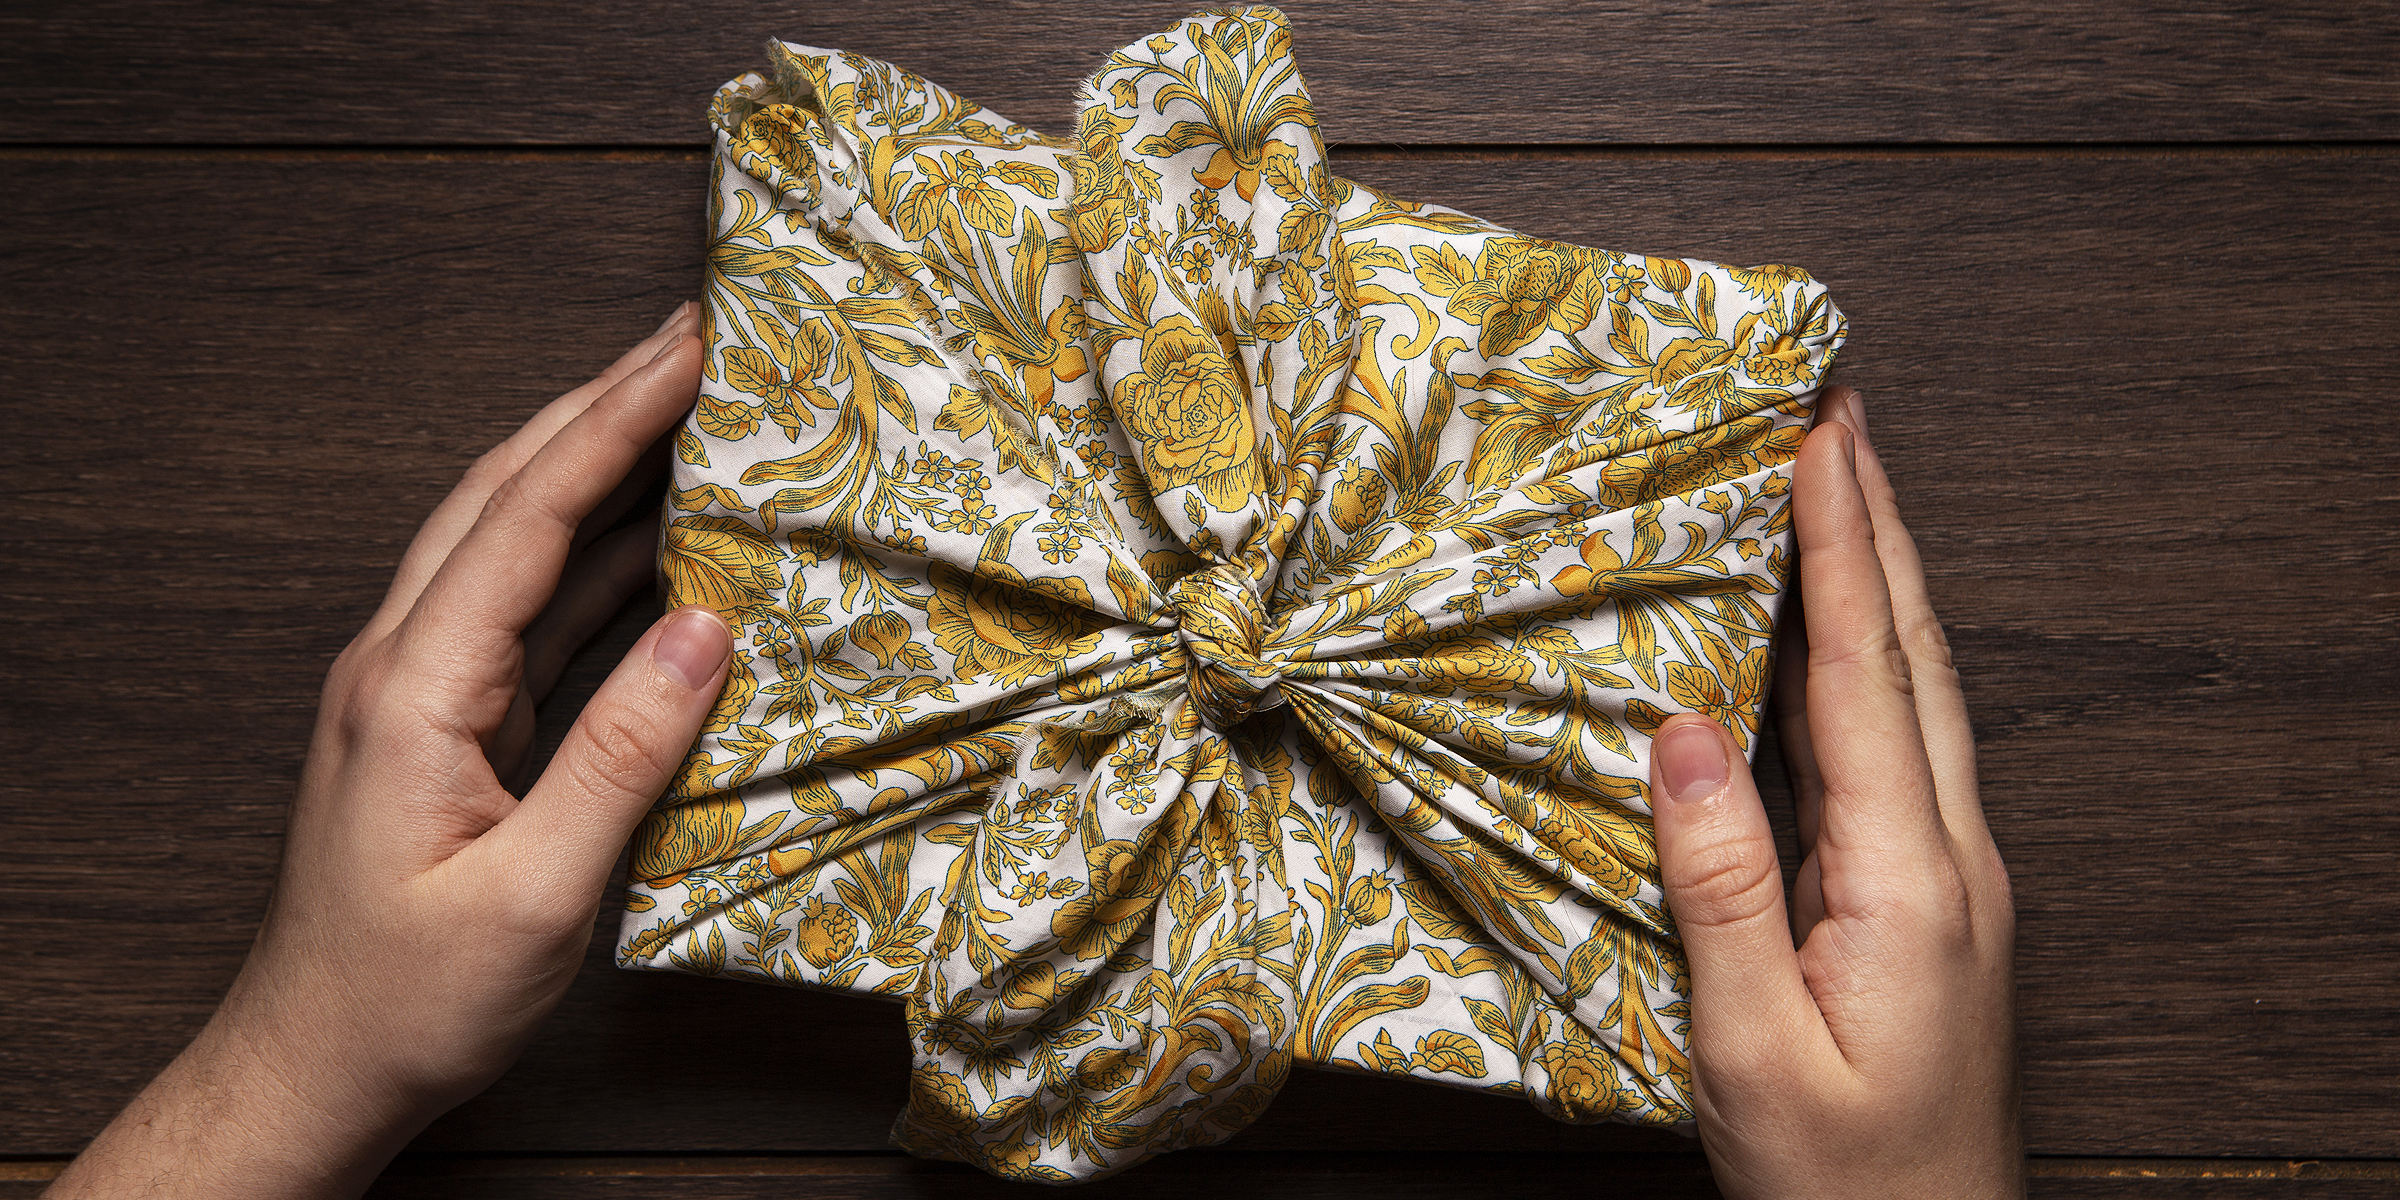 A gift wrapped in material | Source: Freepik